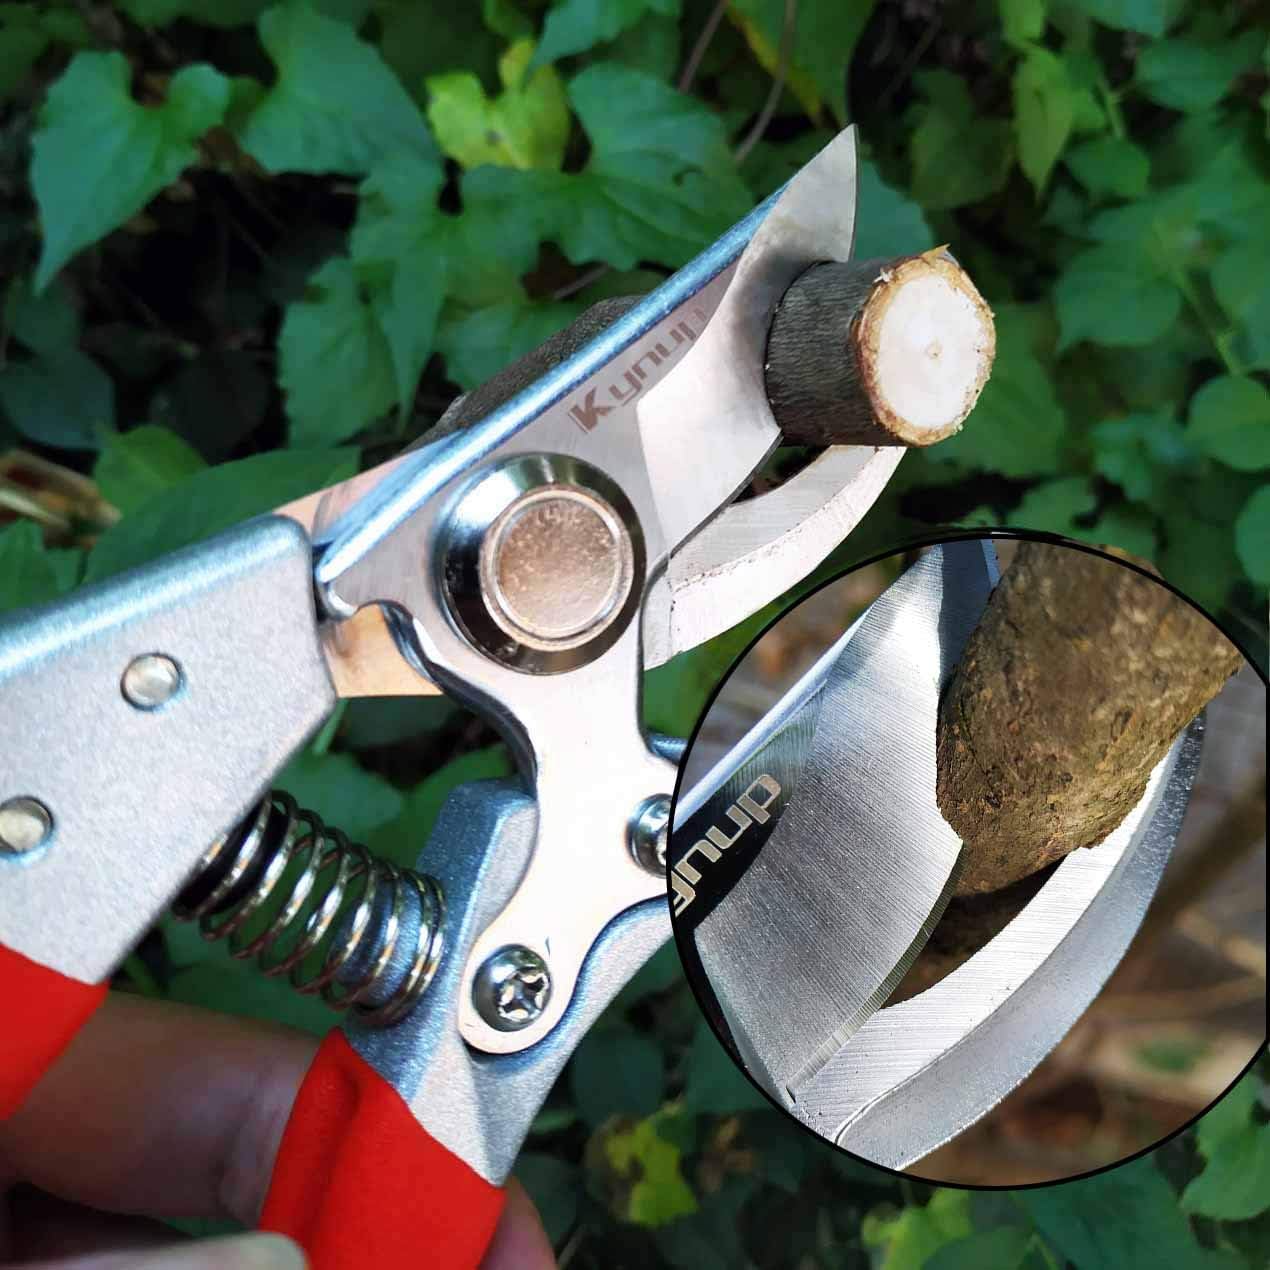 Nevlers 8 Anvil Pruning Shears for Gardening Heavy Duty | Stainless Steel  Garden Clippers Handheld w/ 8mm Cutting Cap | Hand Pruner Shears w/Rubber